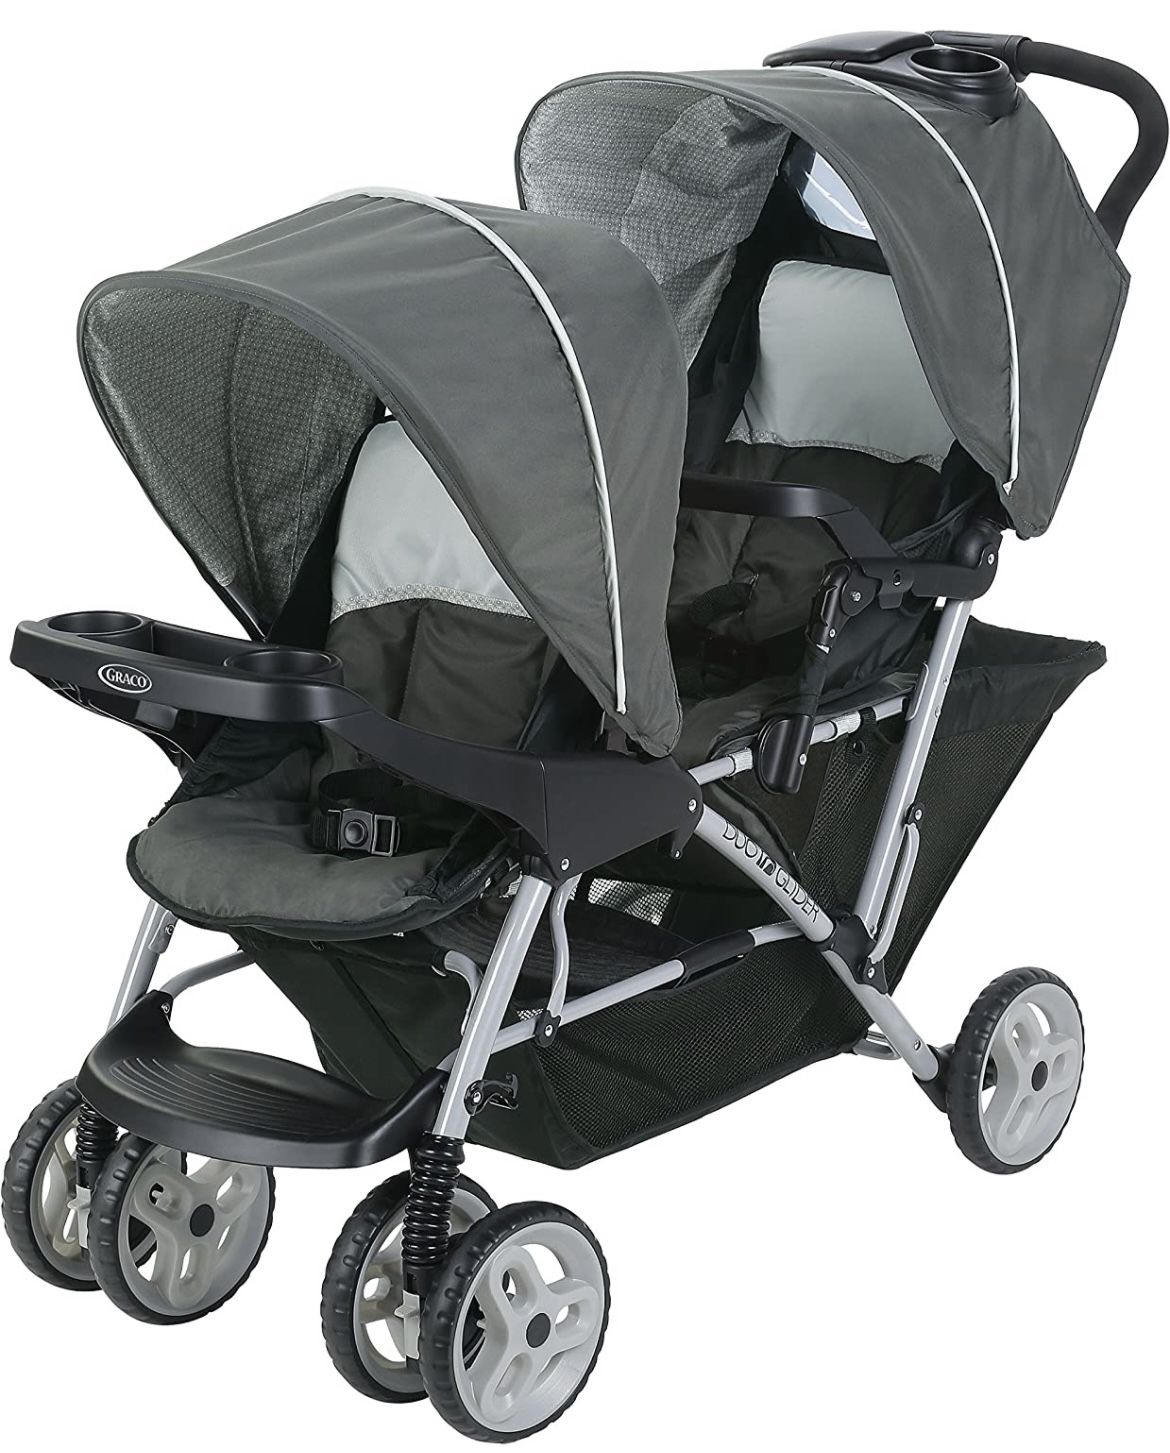 Graco DuoGlider Double Stroller | Lightweight Double Stroller with Tandem Seating